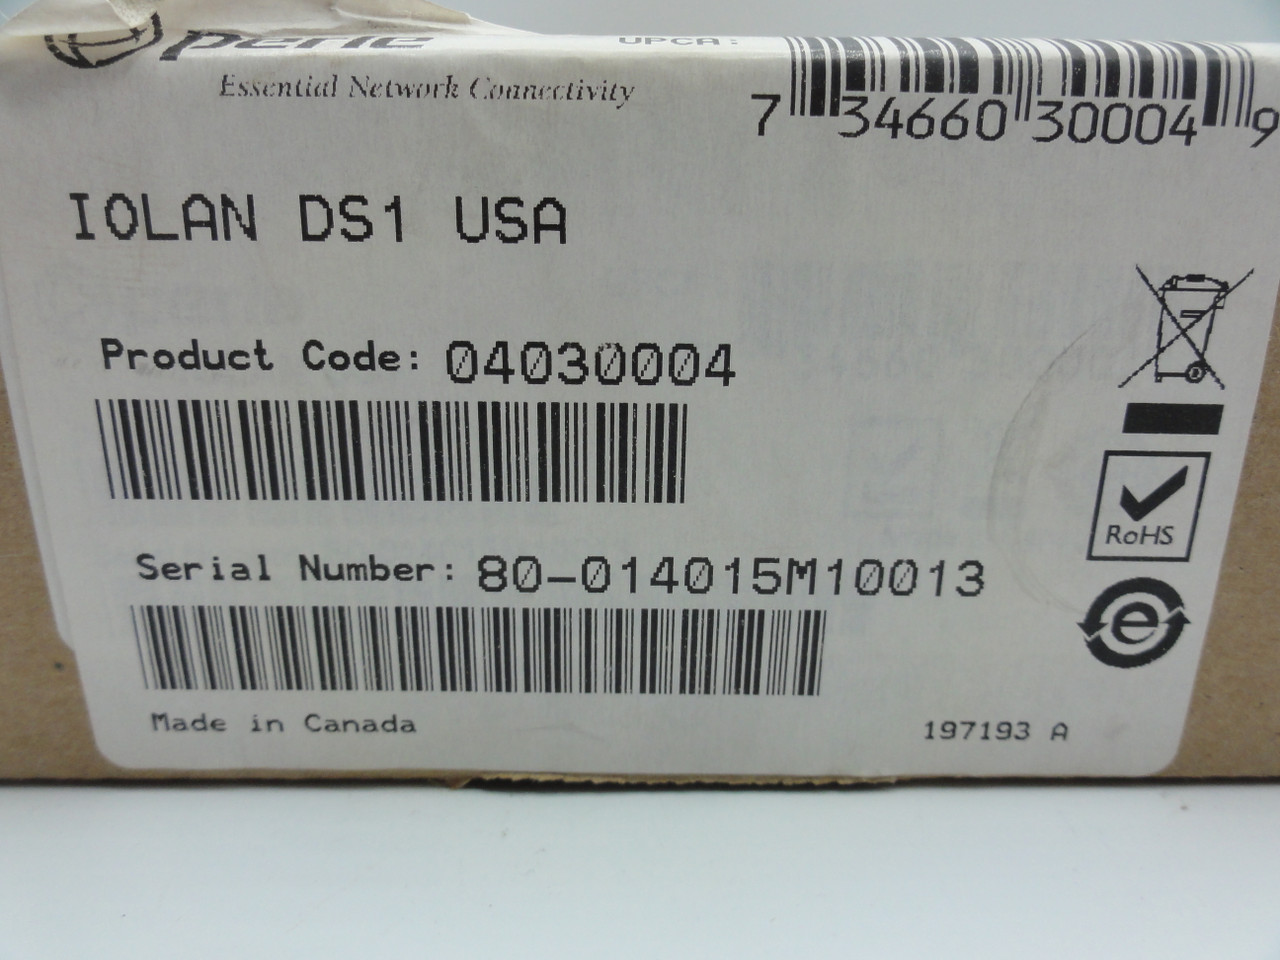 Perle Systems 04030004 IOLAN DS1 DB9-RJ45 1 Port Device